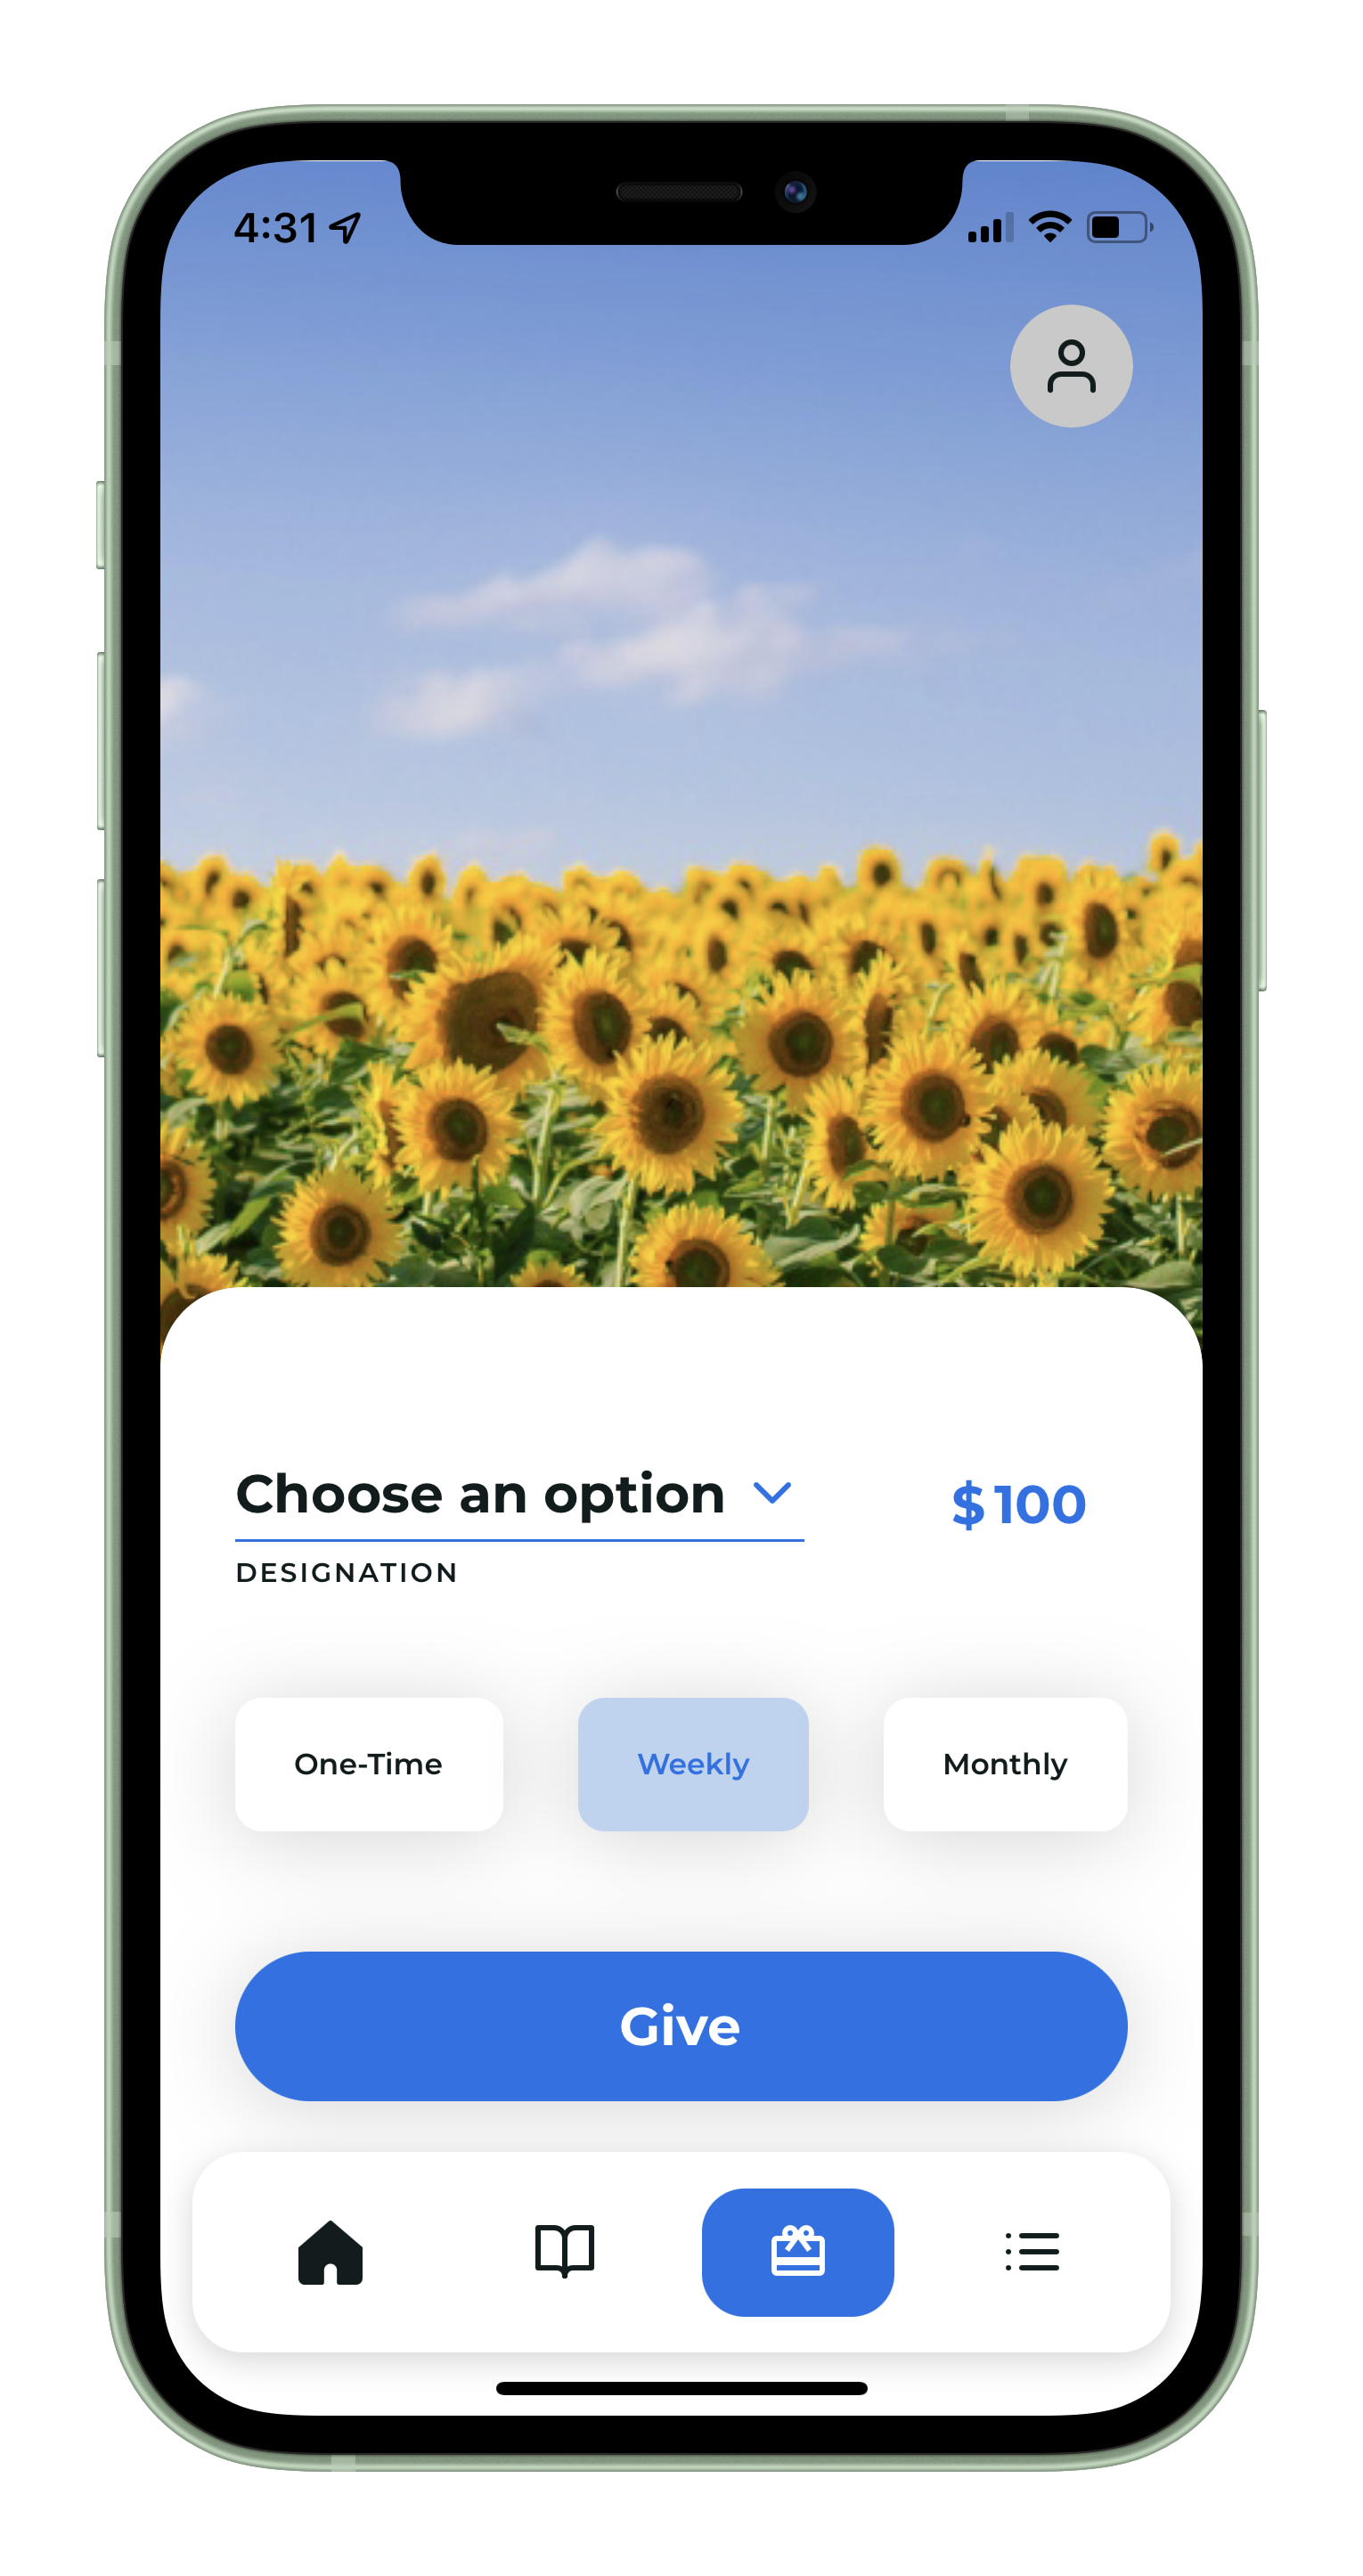 Image displaying a Giving page in the PocketPlatform app. There is a Choose an option drop-down list, the dollar amount on the right, options to make the donation one-time, weekly, or monthly, and the blue Give button under those options.